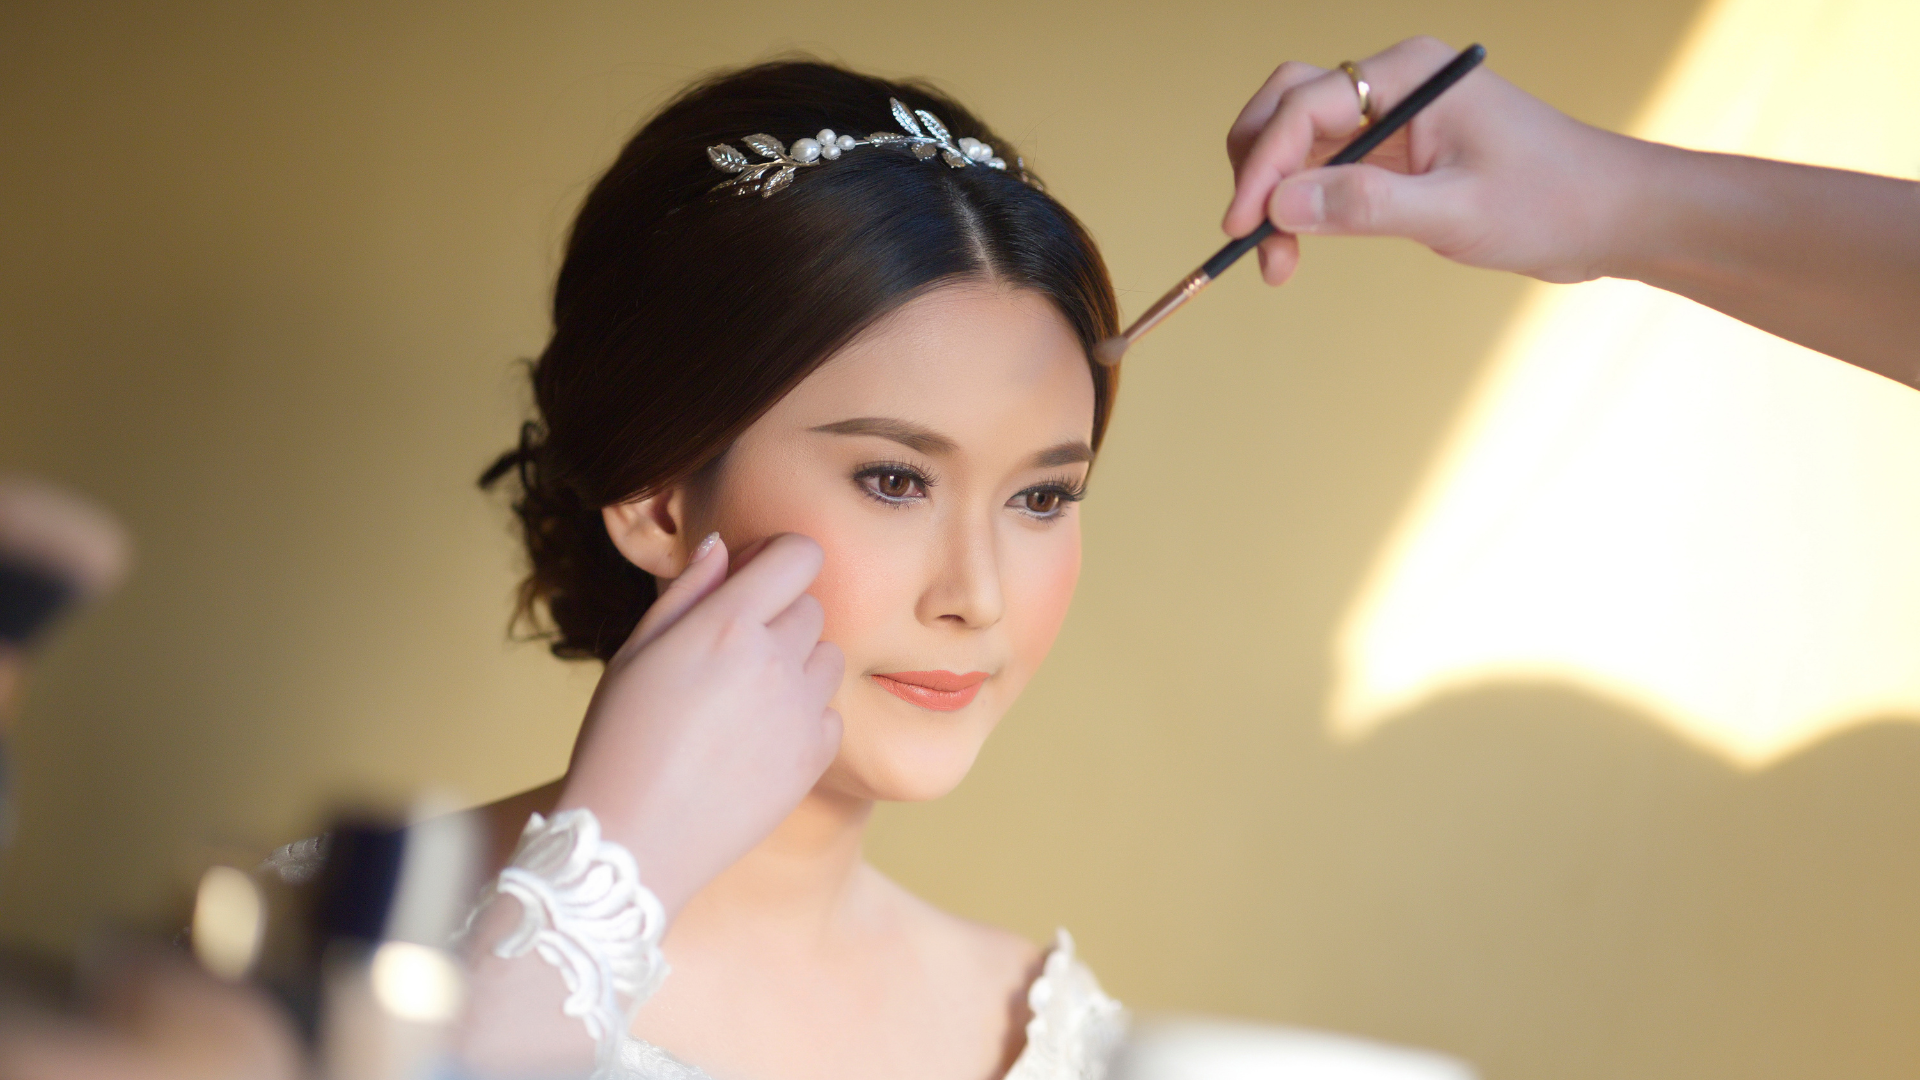 Bridal makeup malaysia bride trial makeup wedding malaysia what to take care about trial makeup wedding mistake